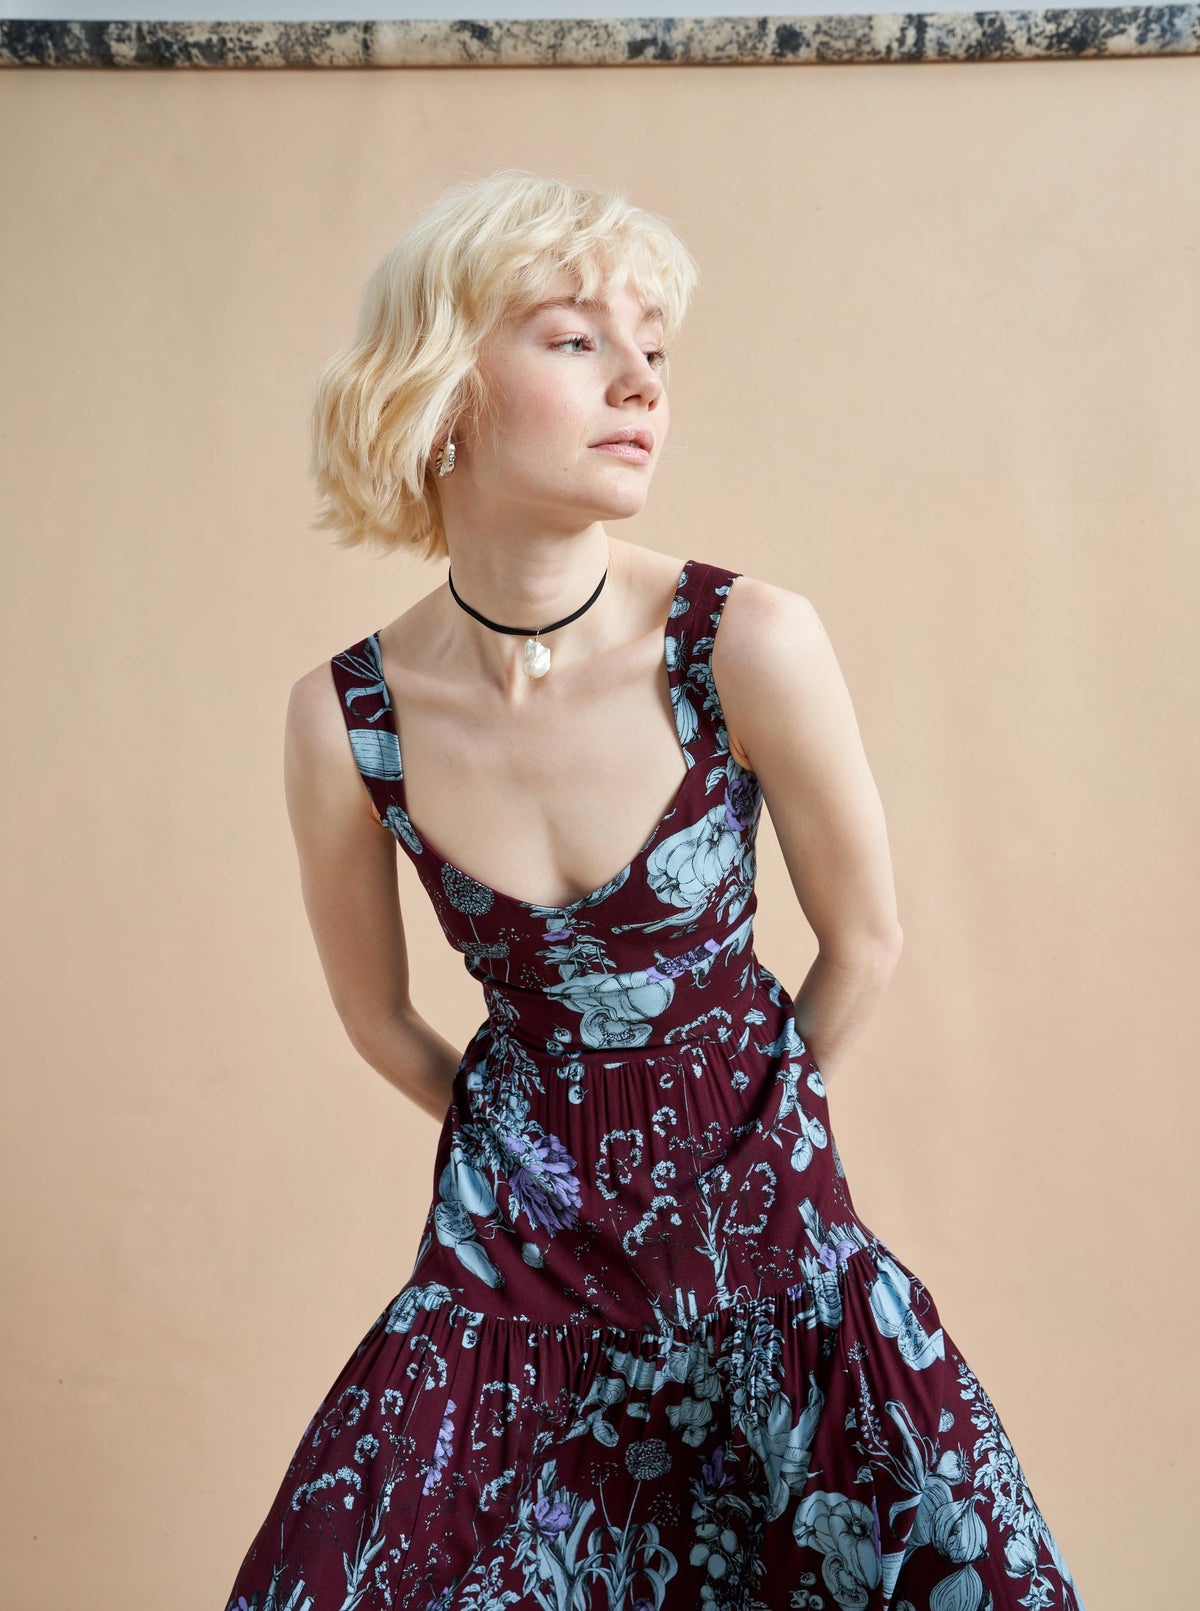 Inspired by musician and La Ligne muse, Laura Lee, this sexy stunner made from 100% sustainable viscose in our season's favorite vegetable toile print is made for getting down and rocking out featuring a wide v-neck and smocked back and waist panels so nothing gets in the way of having a good time.